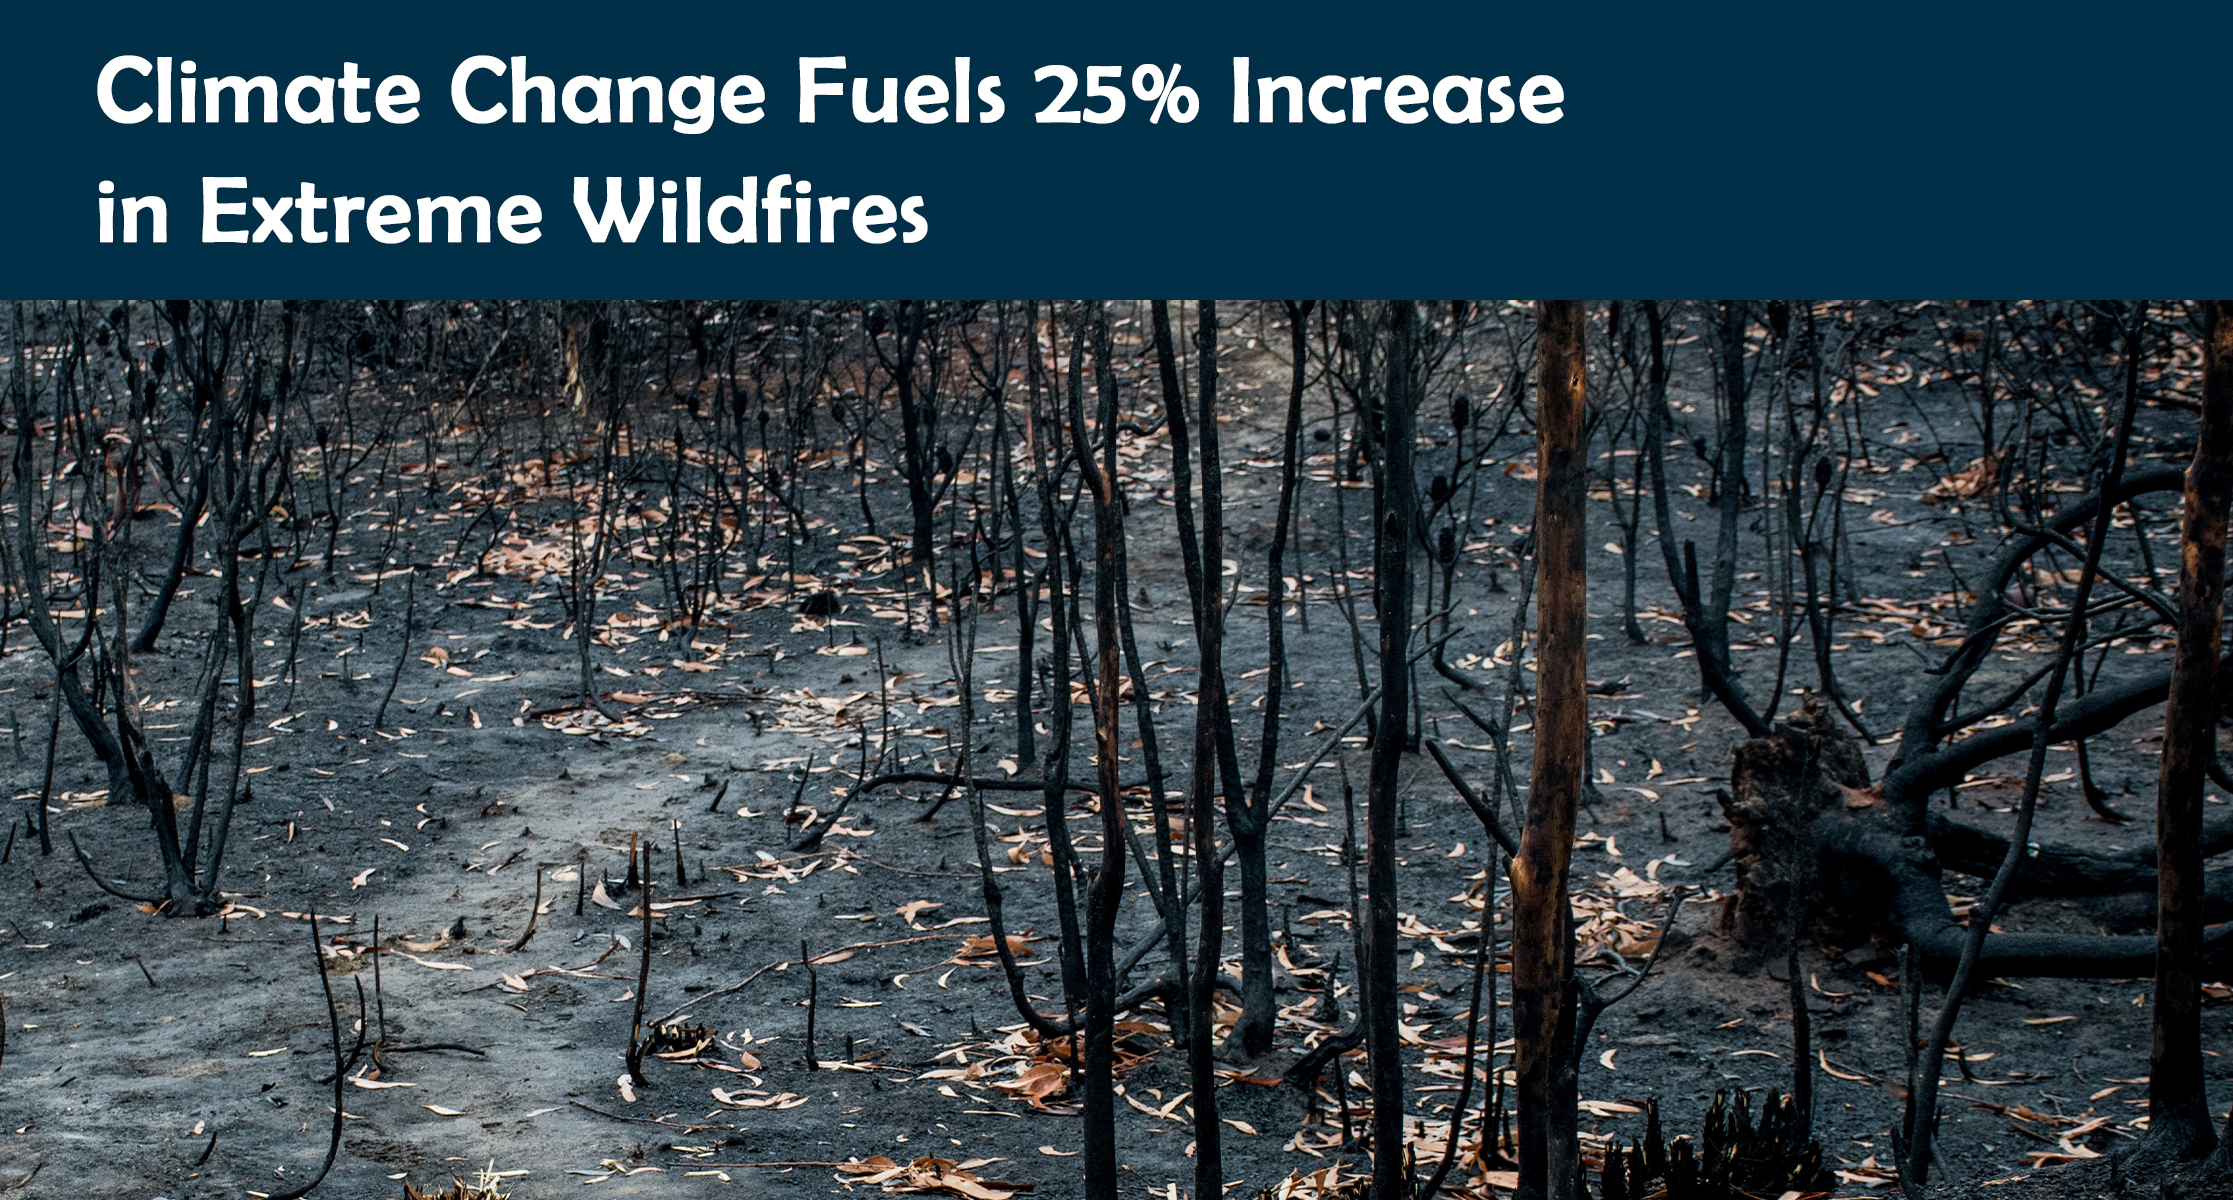 Climate Change Fuels 25% Increase in Extreme Wildfires